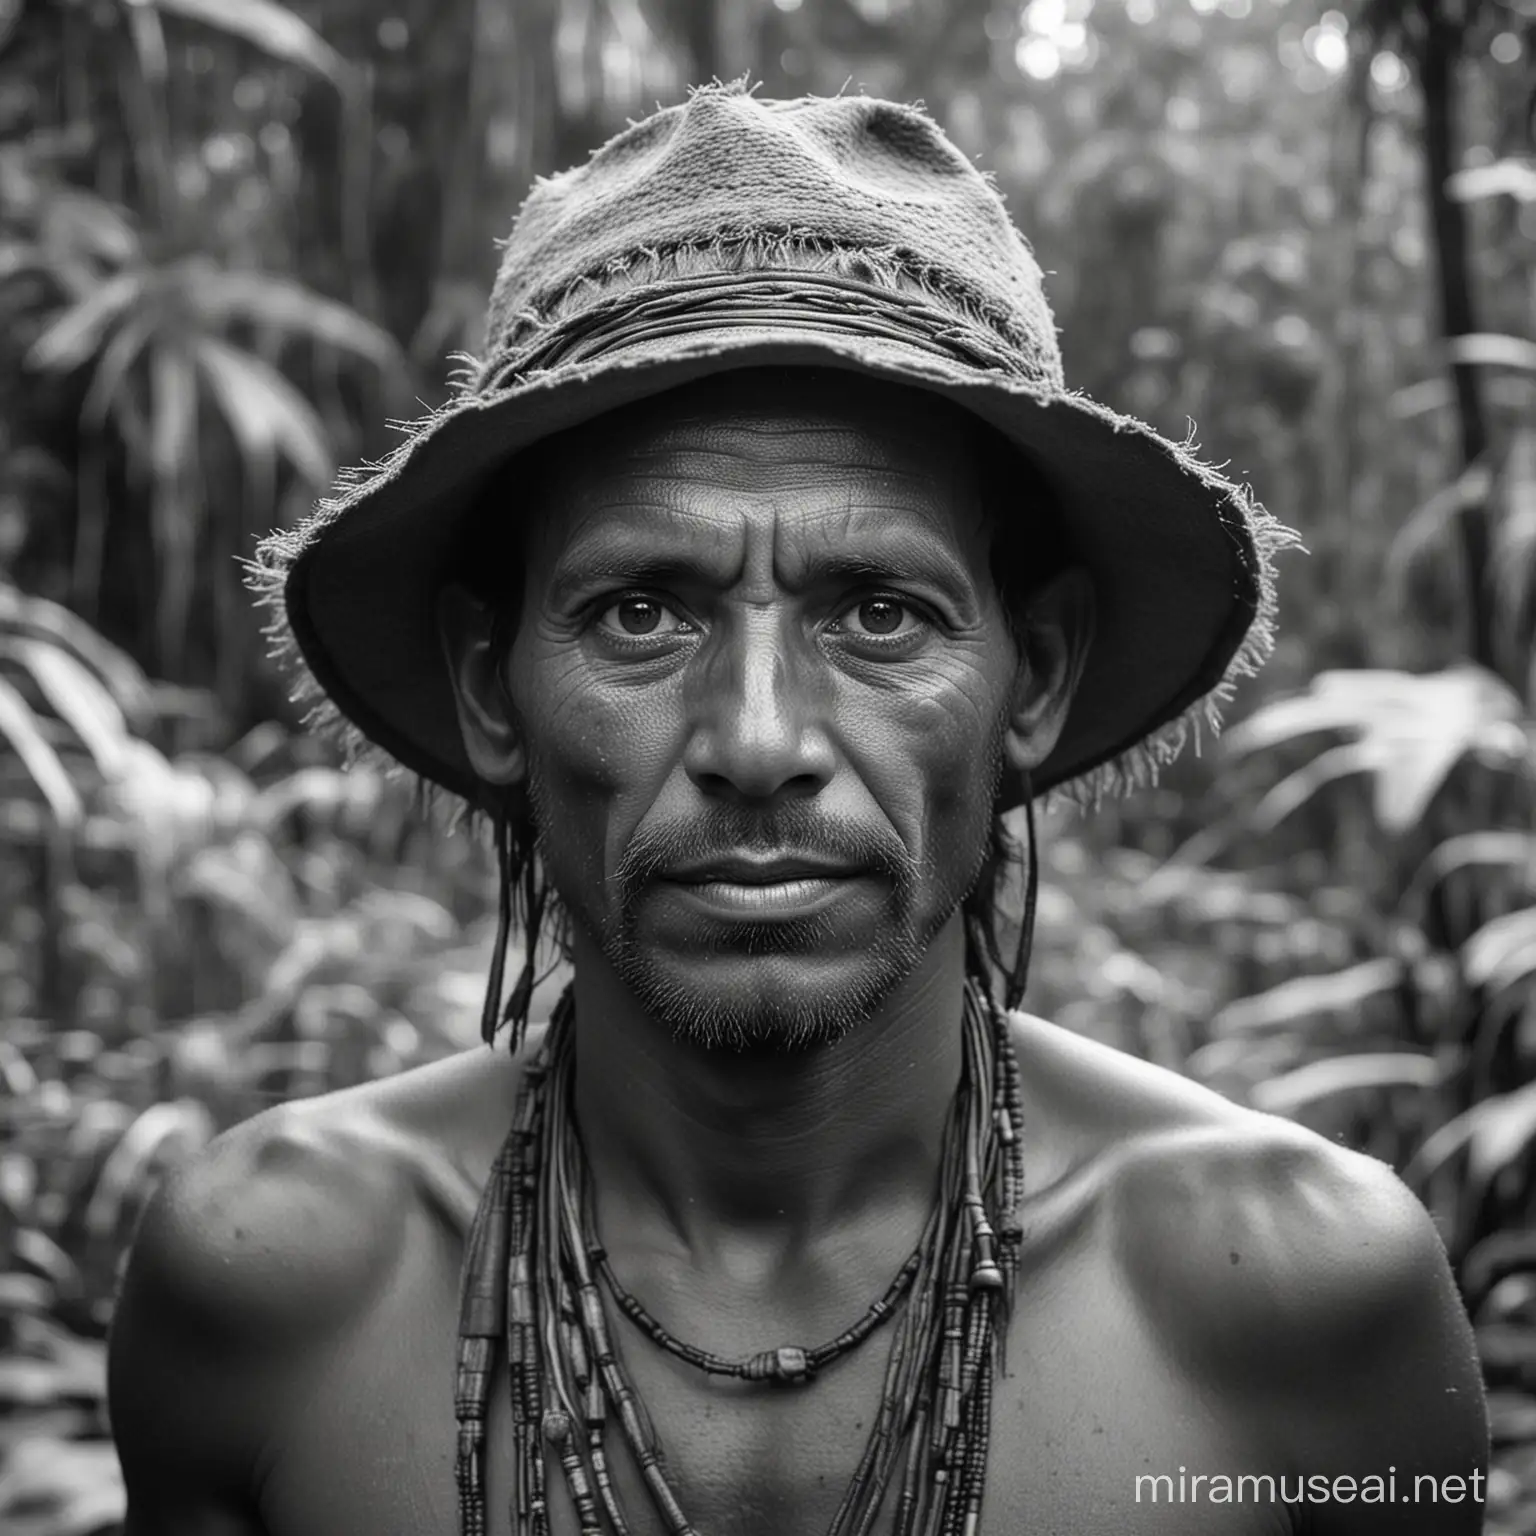 On 19 July 1925, German explorer Oswald Bernie encountered in the deep of the Amzonian jugle a tribe of indigenous people. Black and white photography Zeiss lense 